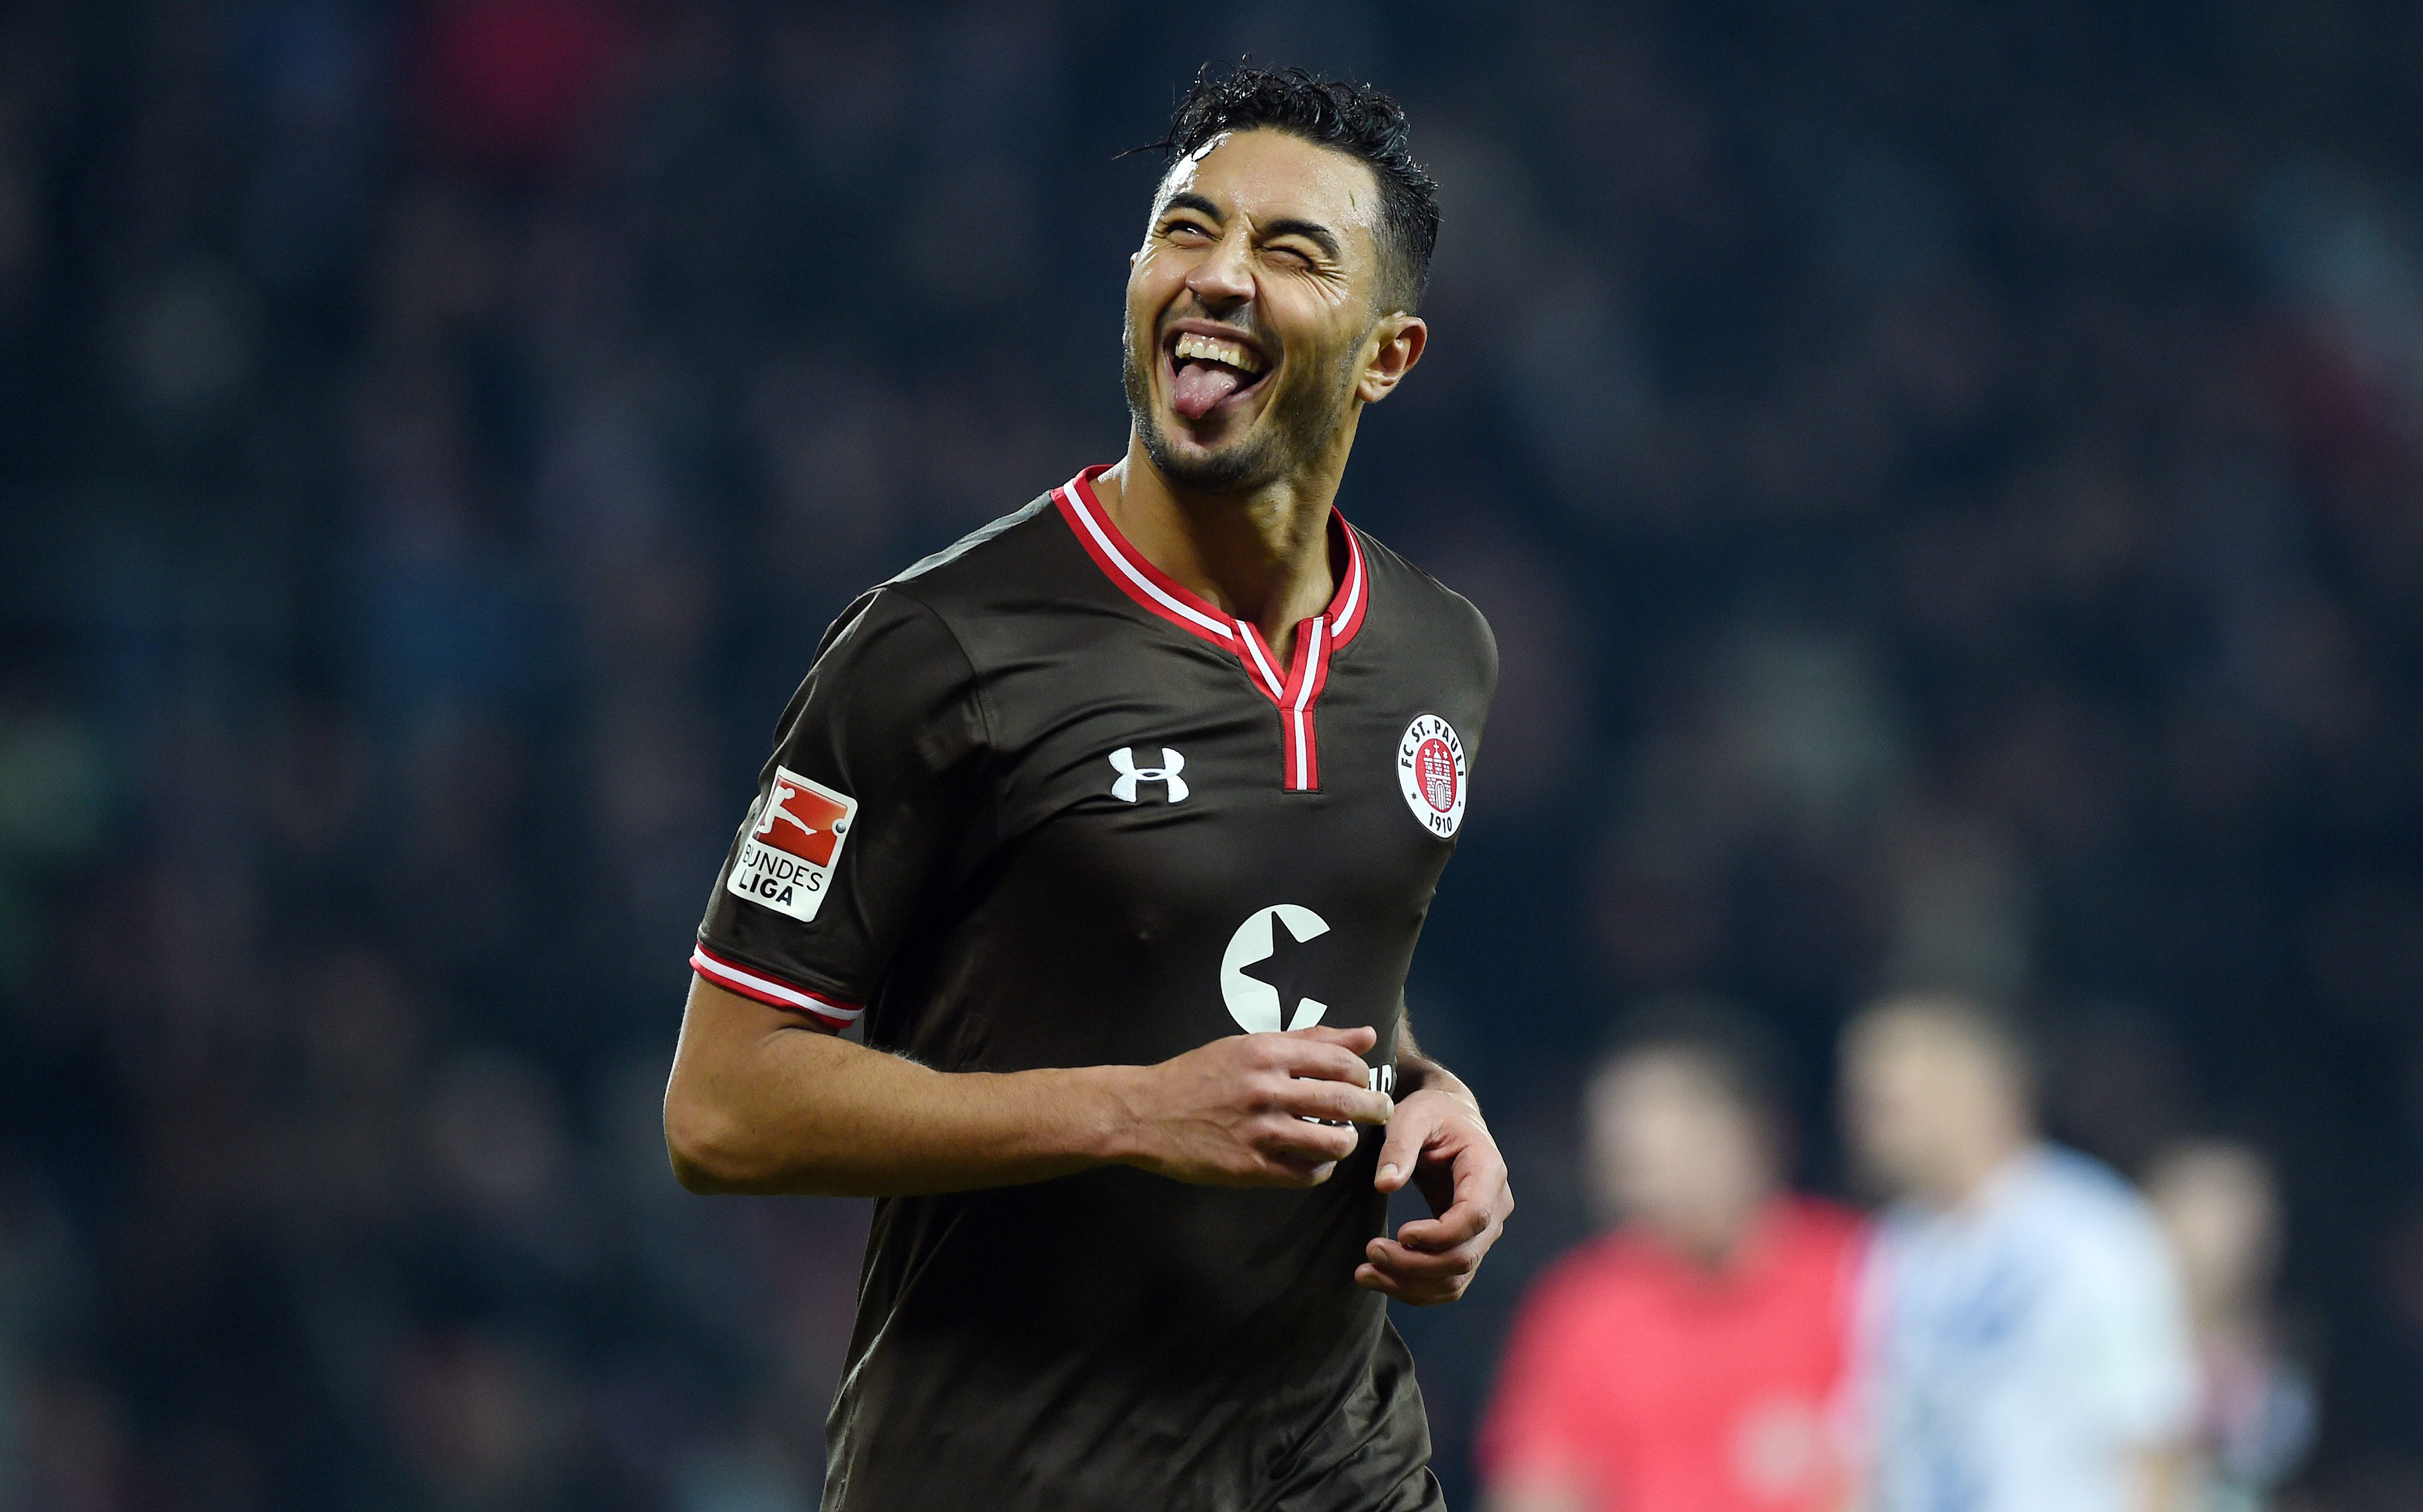 Aziz Bouhaddouz logged 67 attempts on goal last season, netting 15 times. The 30-year-old striker scored an uninterrupted second-half hat-trick in the 5-0 home win over Karlsruhe on 27 February.